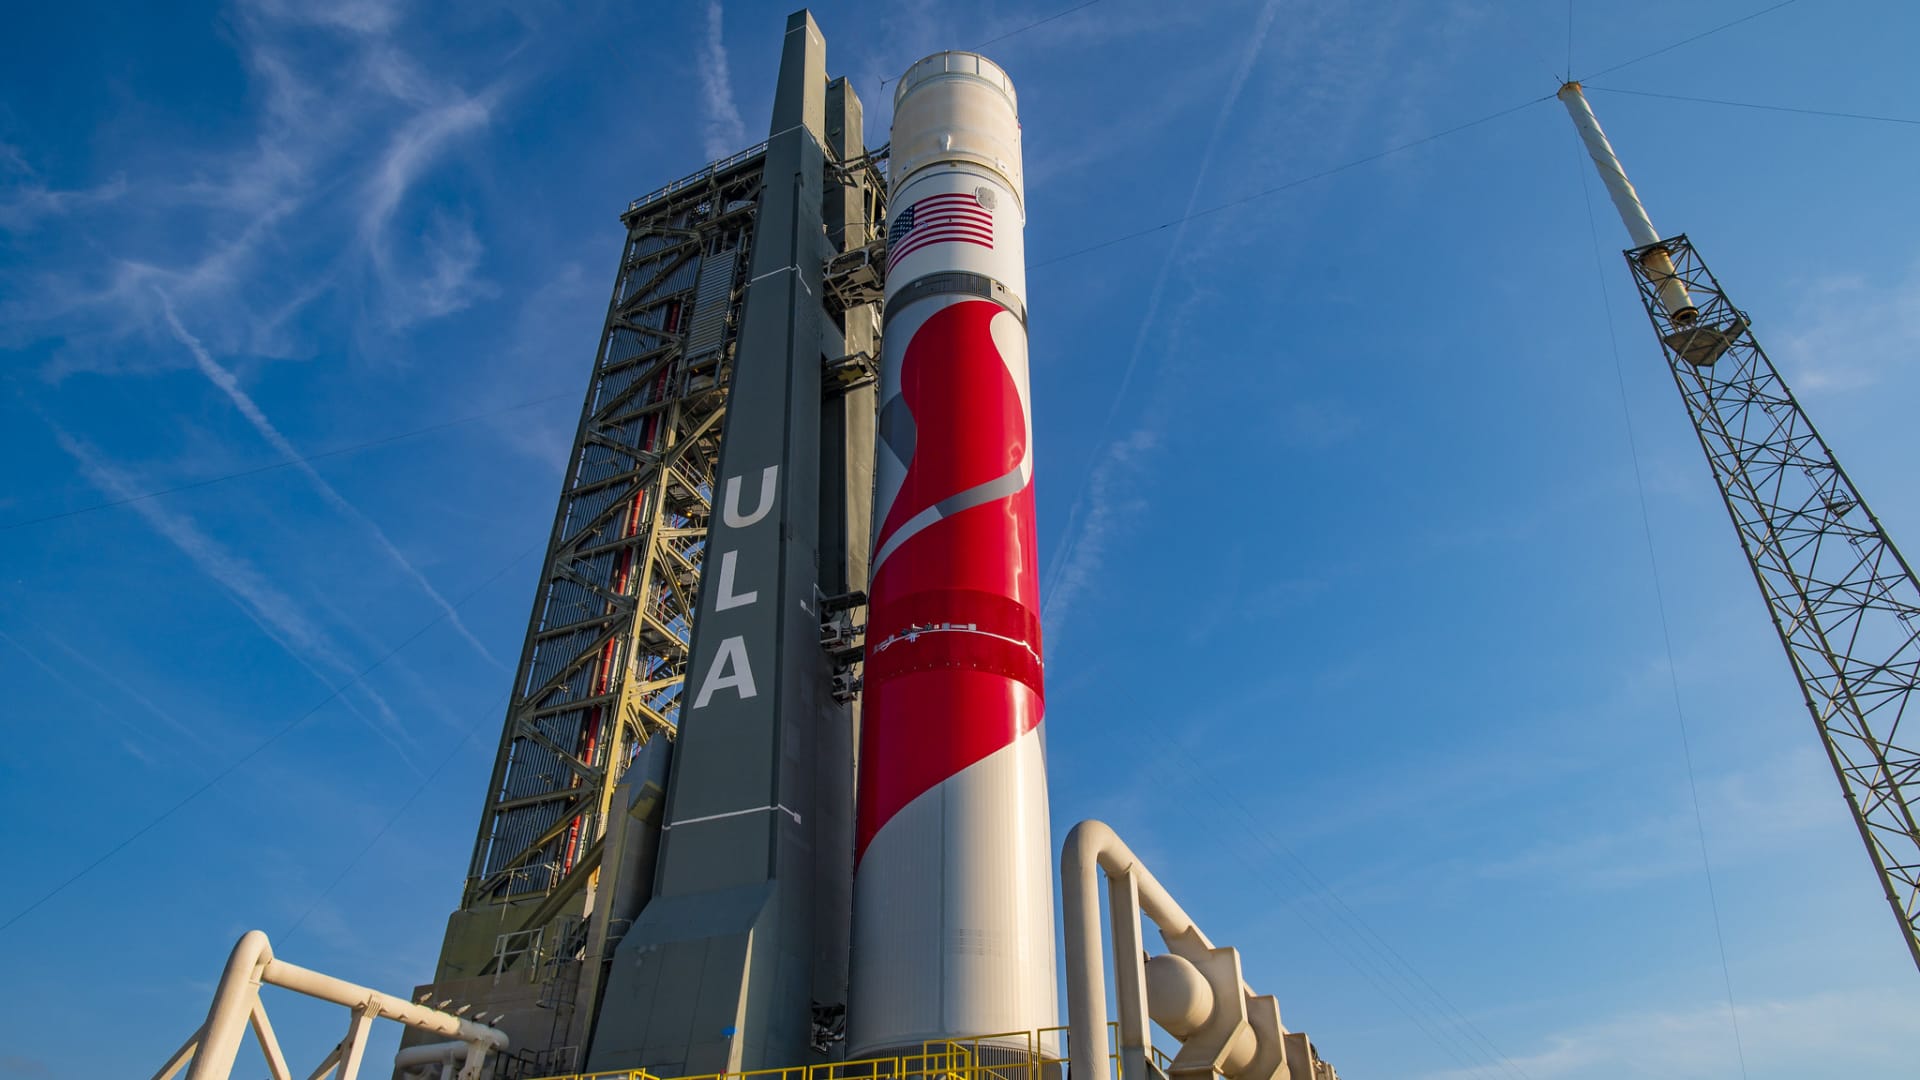 Vulcan rocket will still fly this year after engine explosion